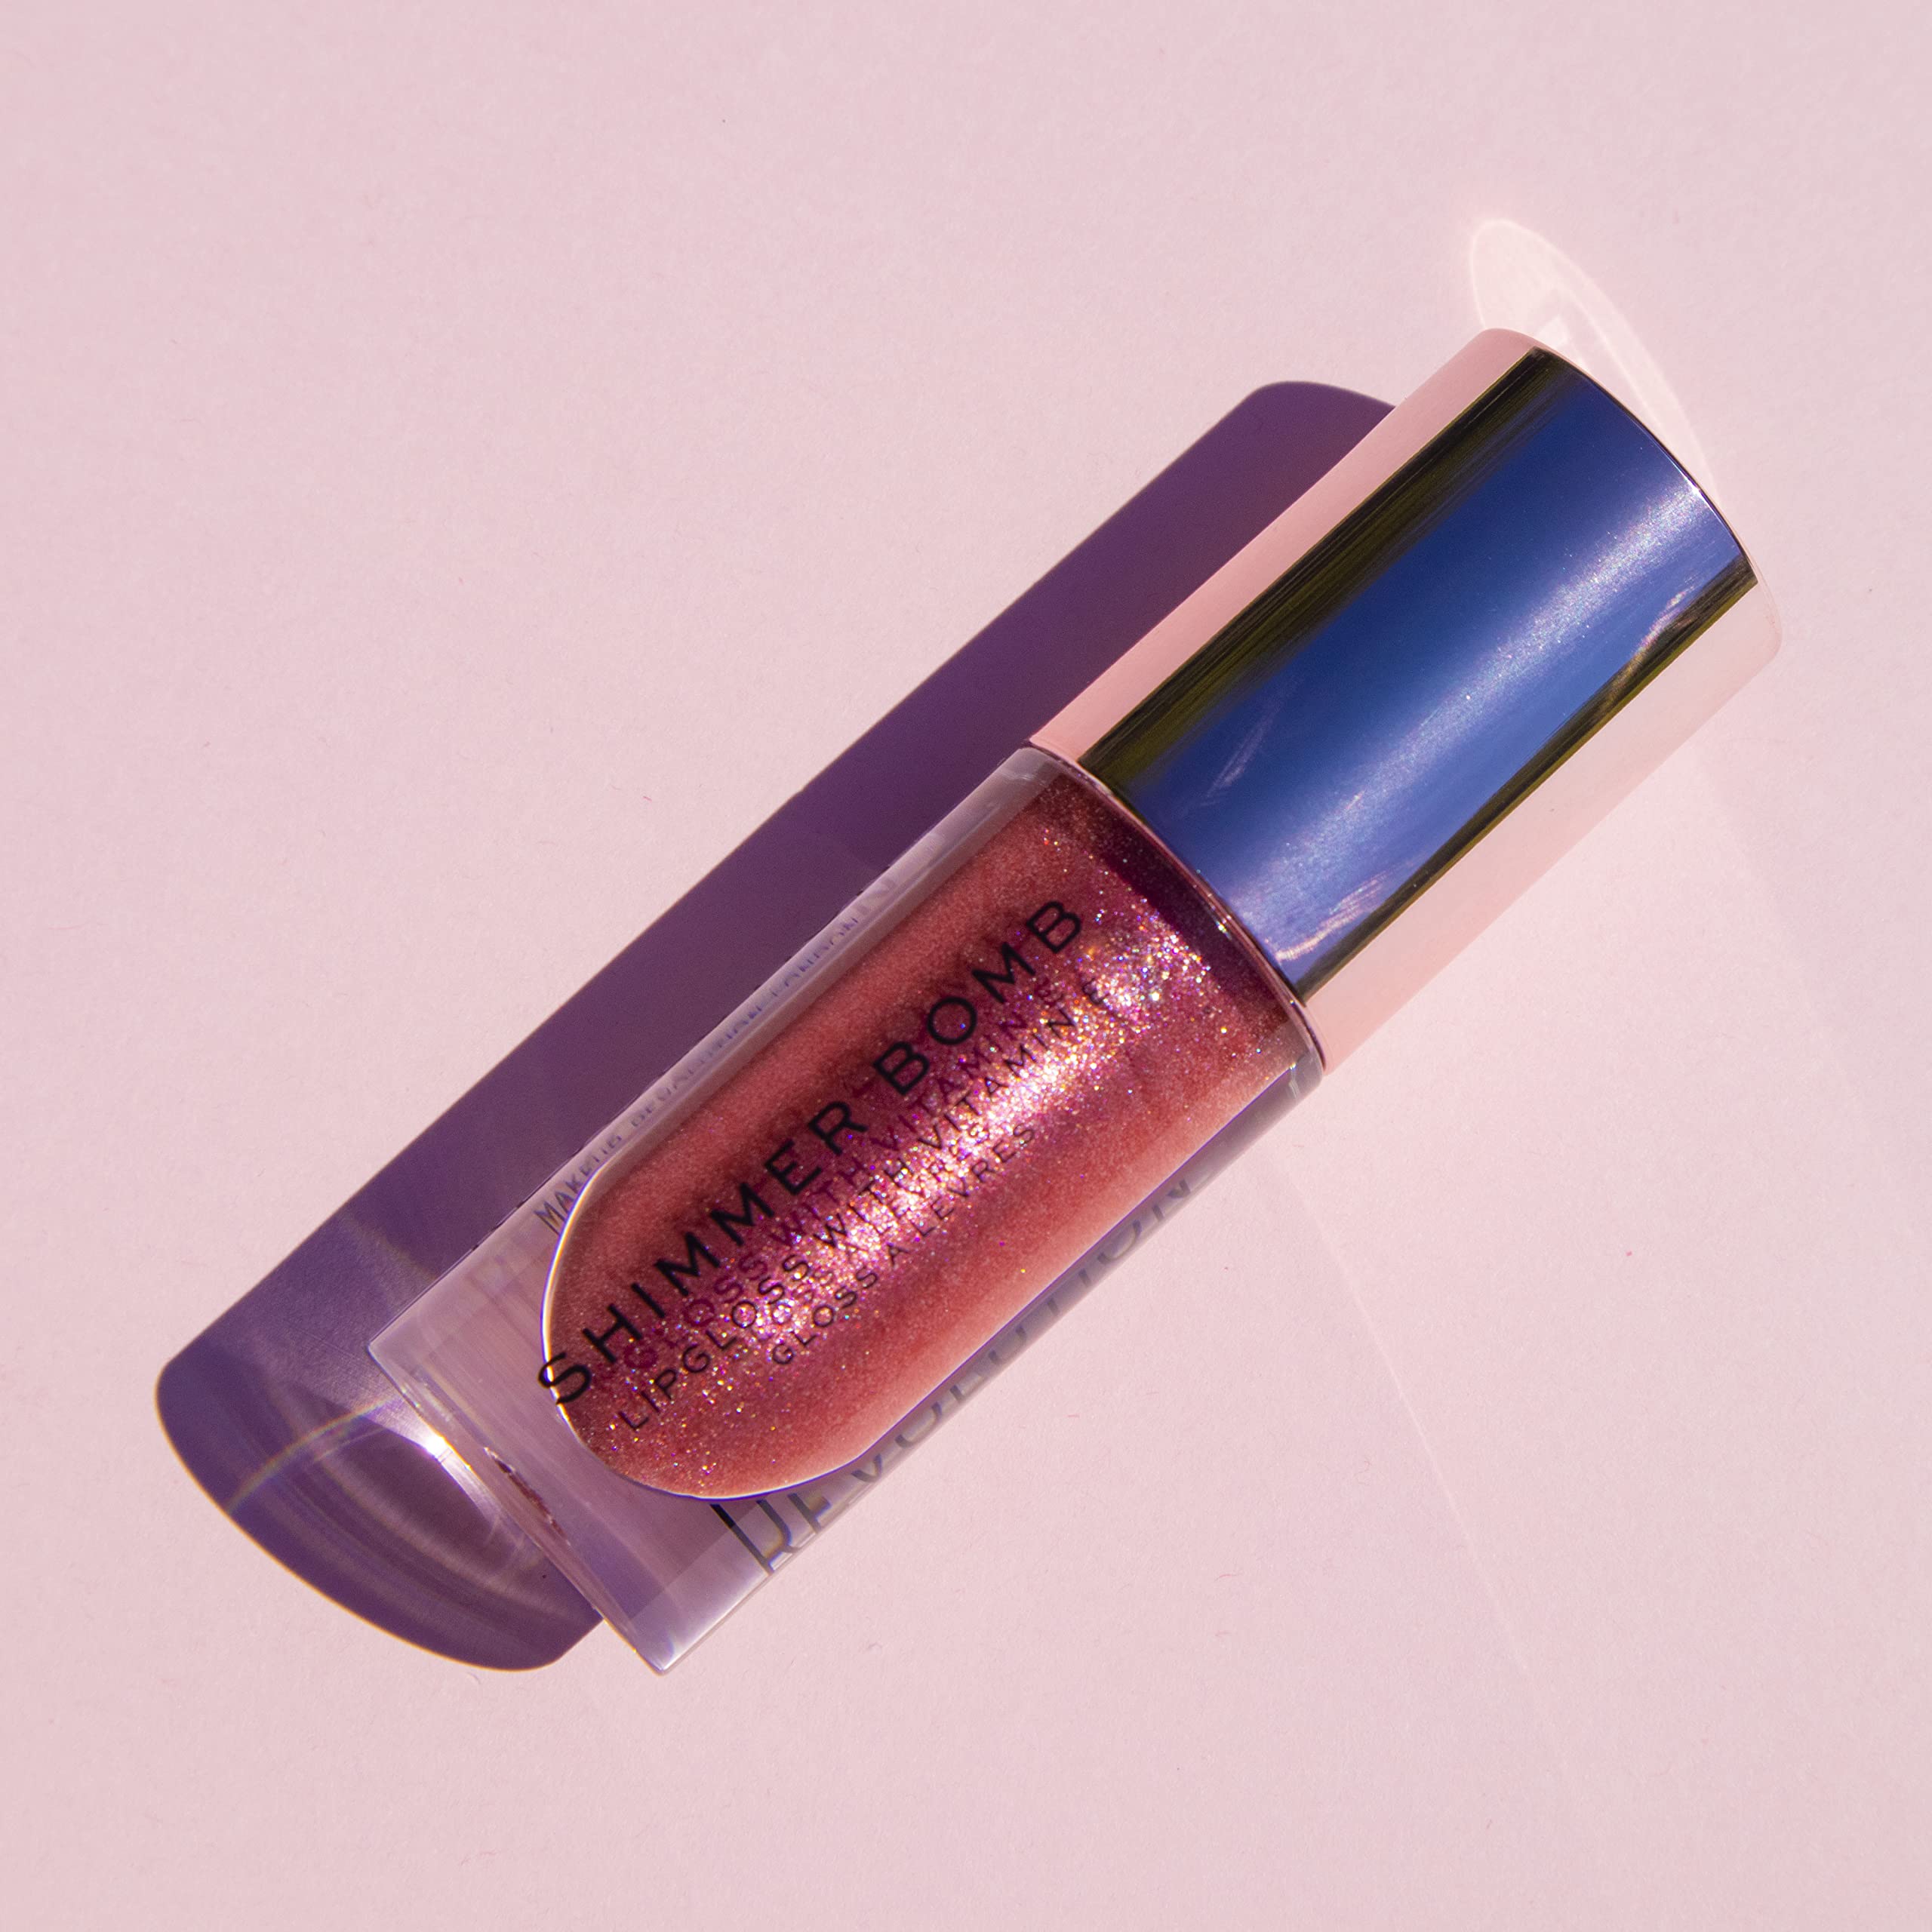 Revolution Shimmer Bomb Lip Gloss, Lip Tint Infused With Vitamin E, Shimmery Finish, Comes In 6 Colors, Distortion